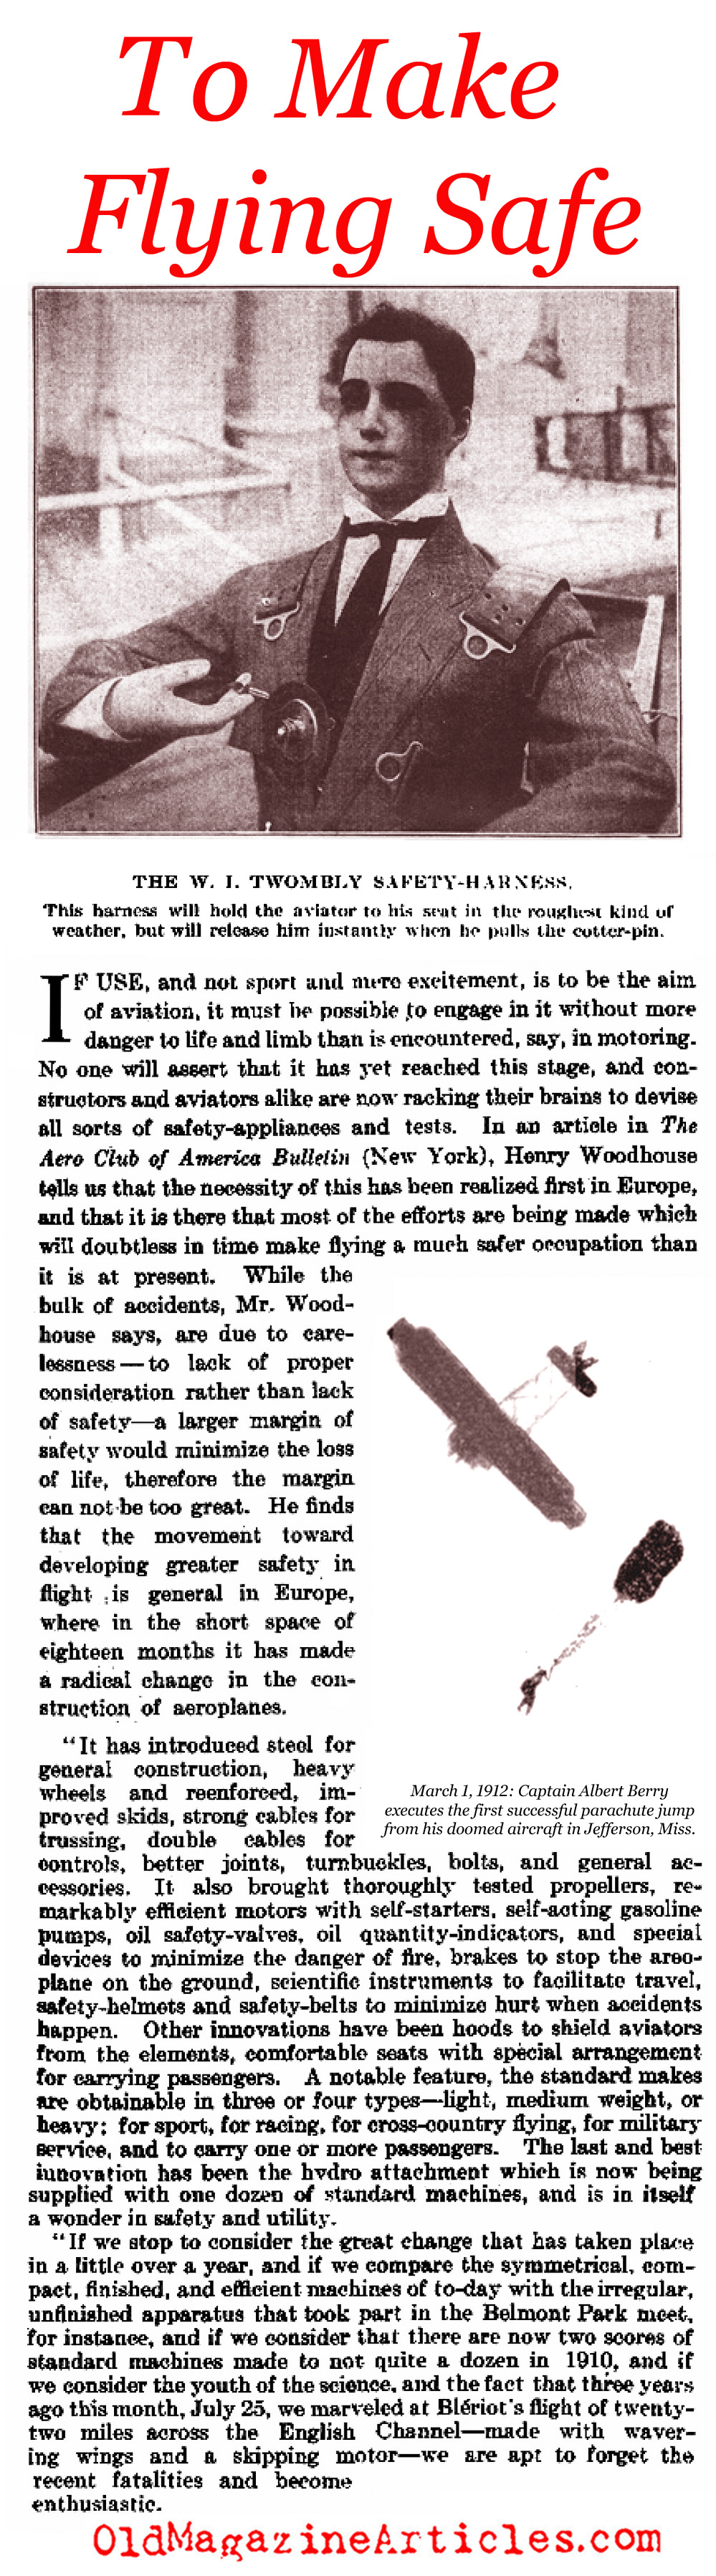 Early Aviation Safety Inventions  (The Literary Digest, 1912)